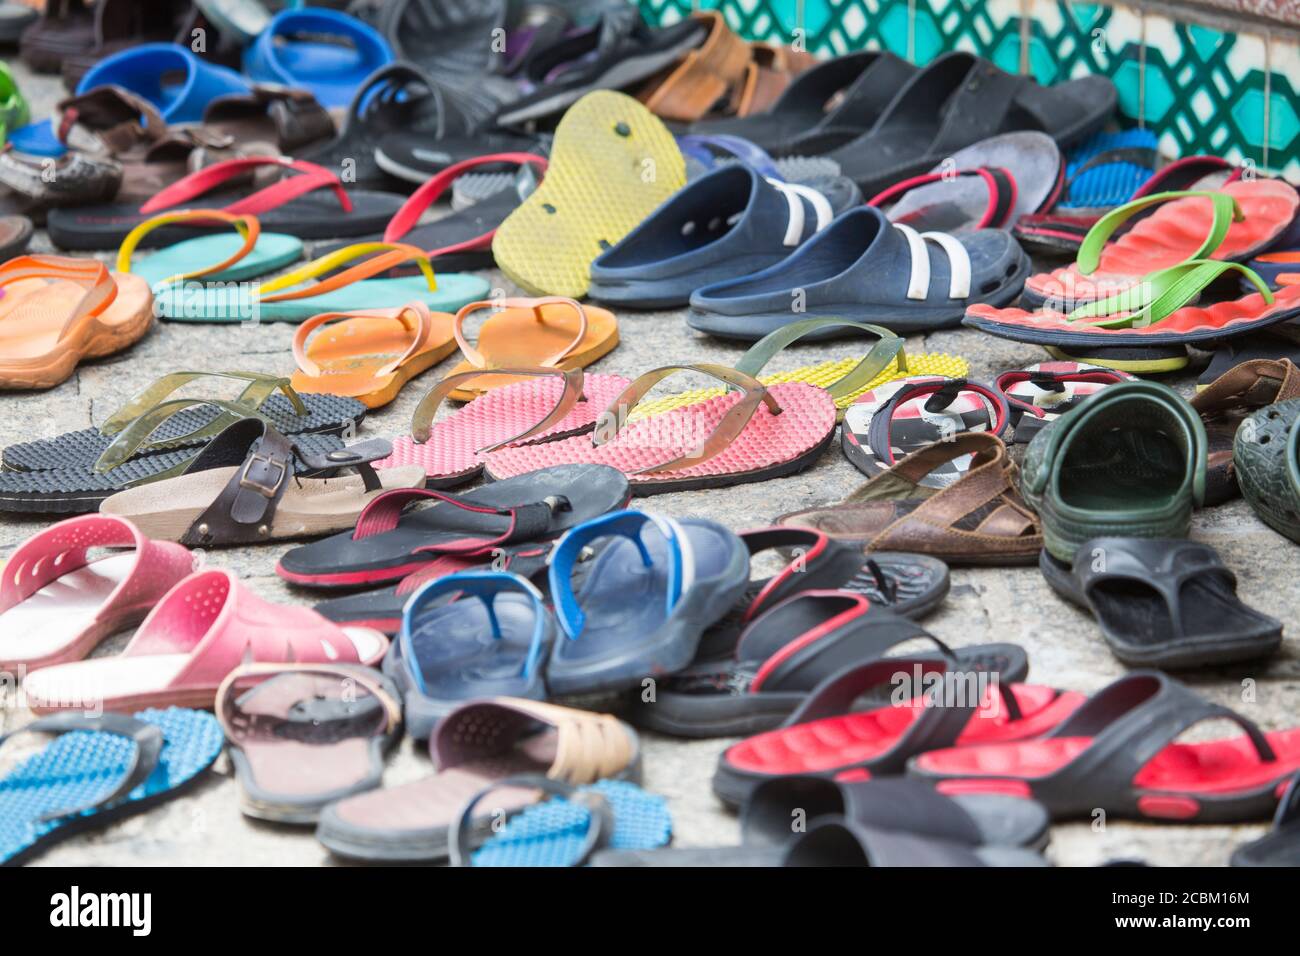 Rows of footwear and flip flops on sidewalk outside Mosque, Malacca, Malaysia Stock Photo Alamy